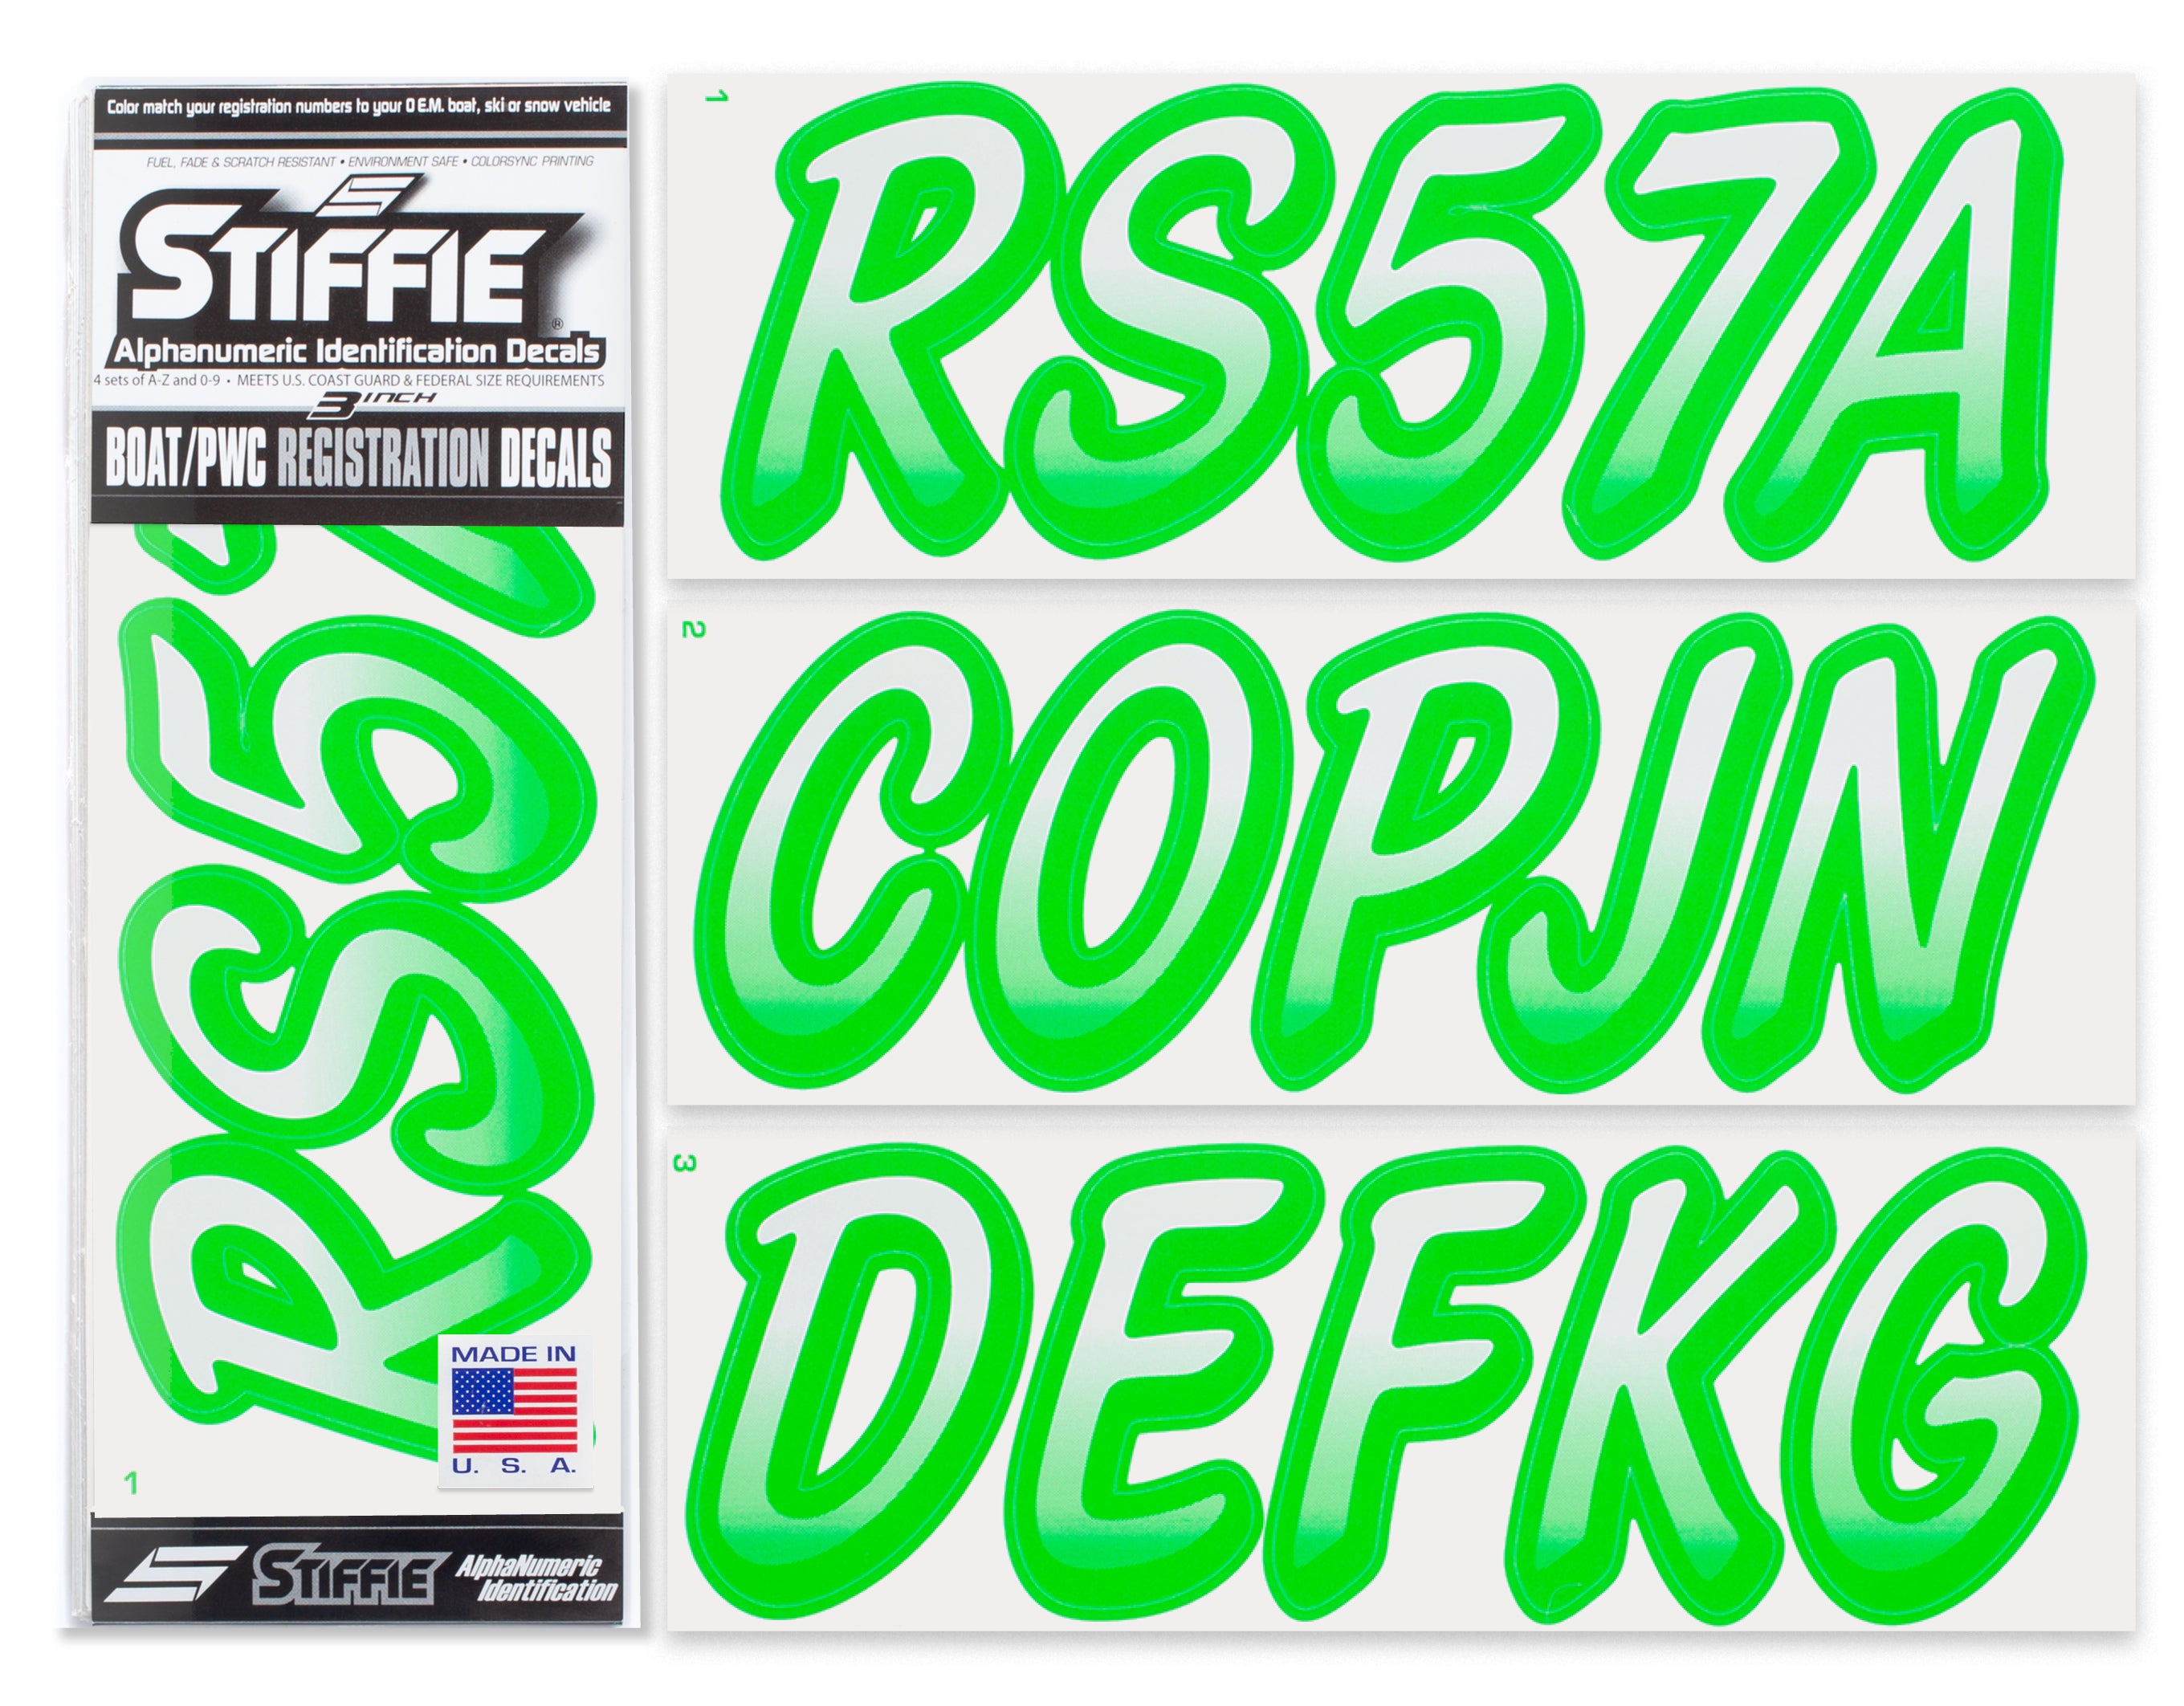 Stiffie Whipline White/Electric Green 3" Alpha-Numeric Registration Identification Numbers Stickers Decals for Boats & Personal Watercraft